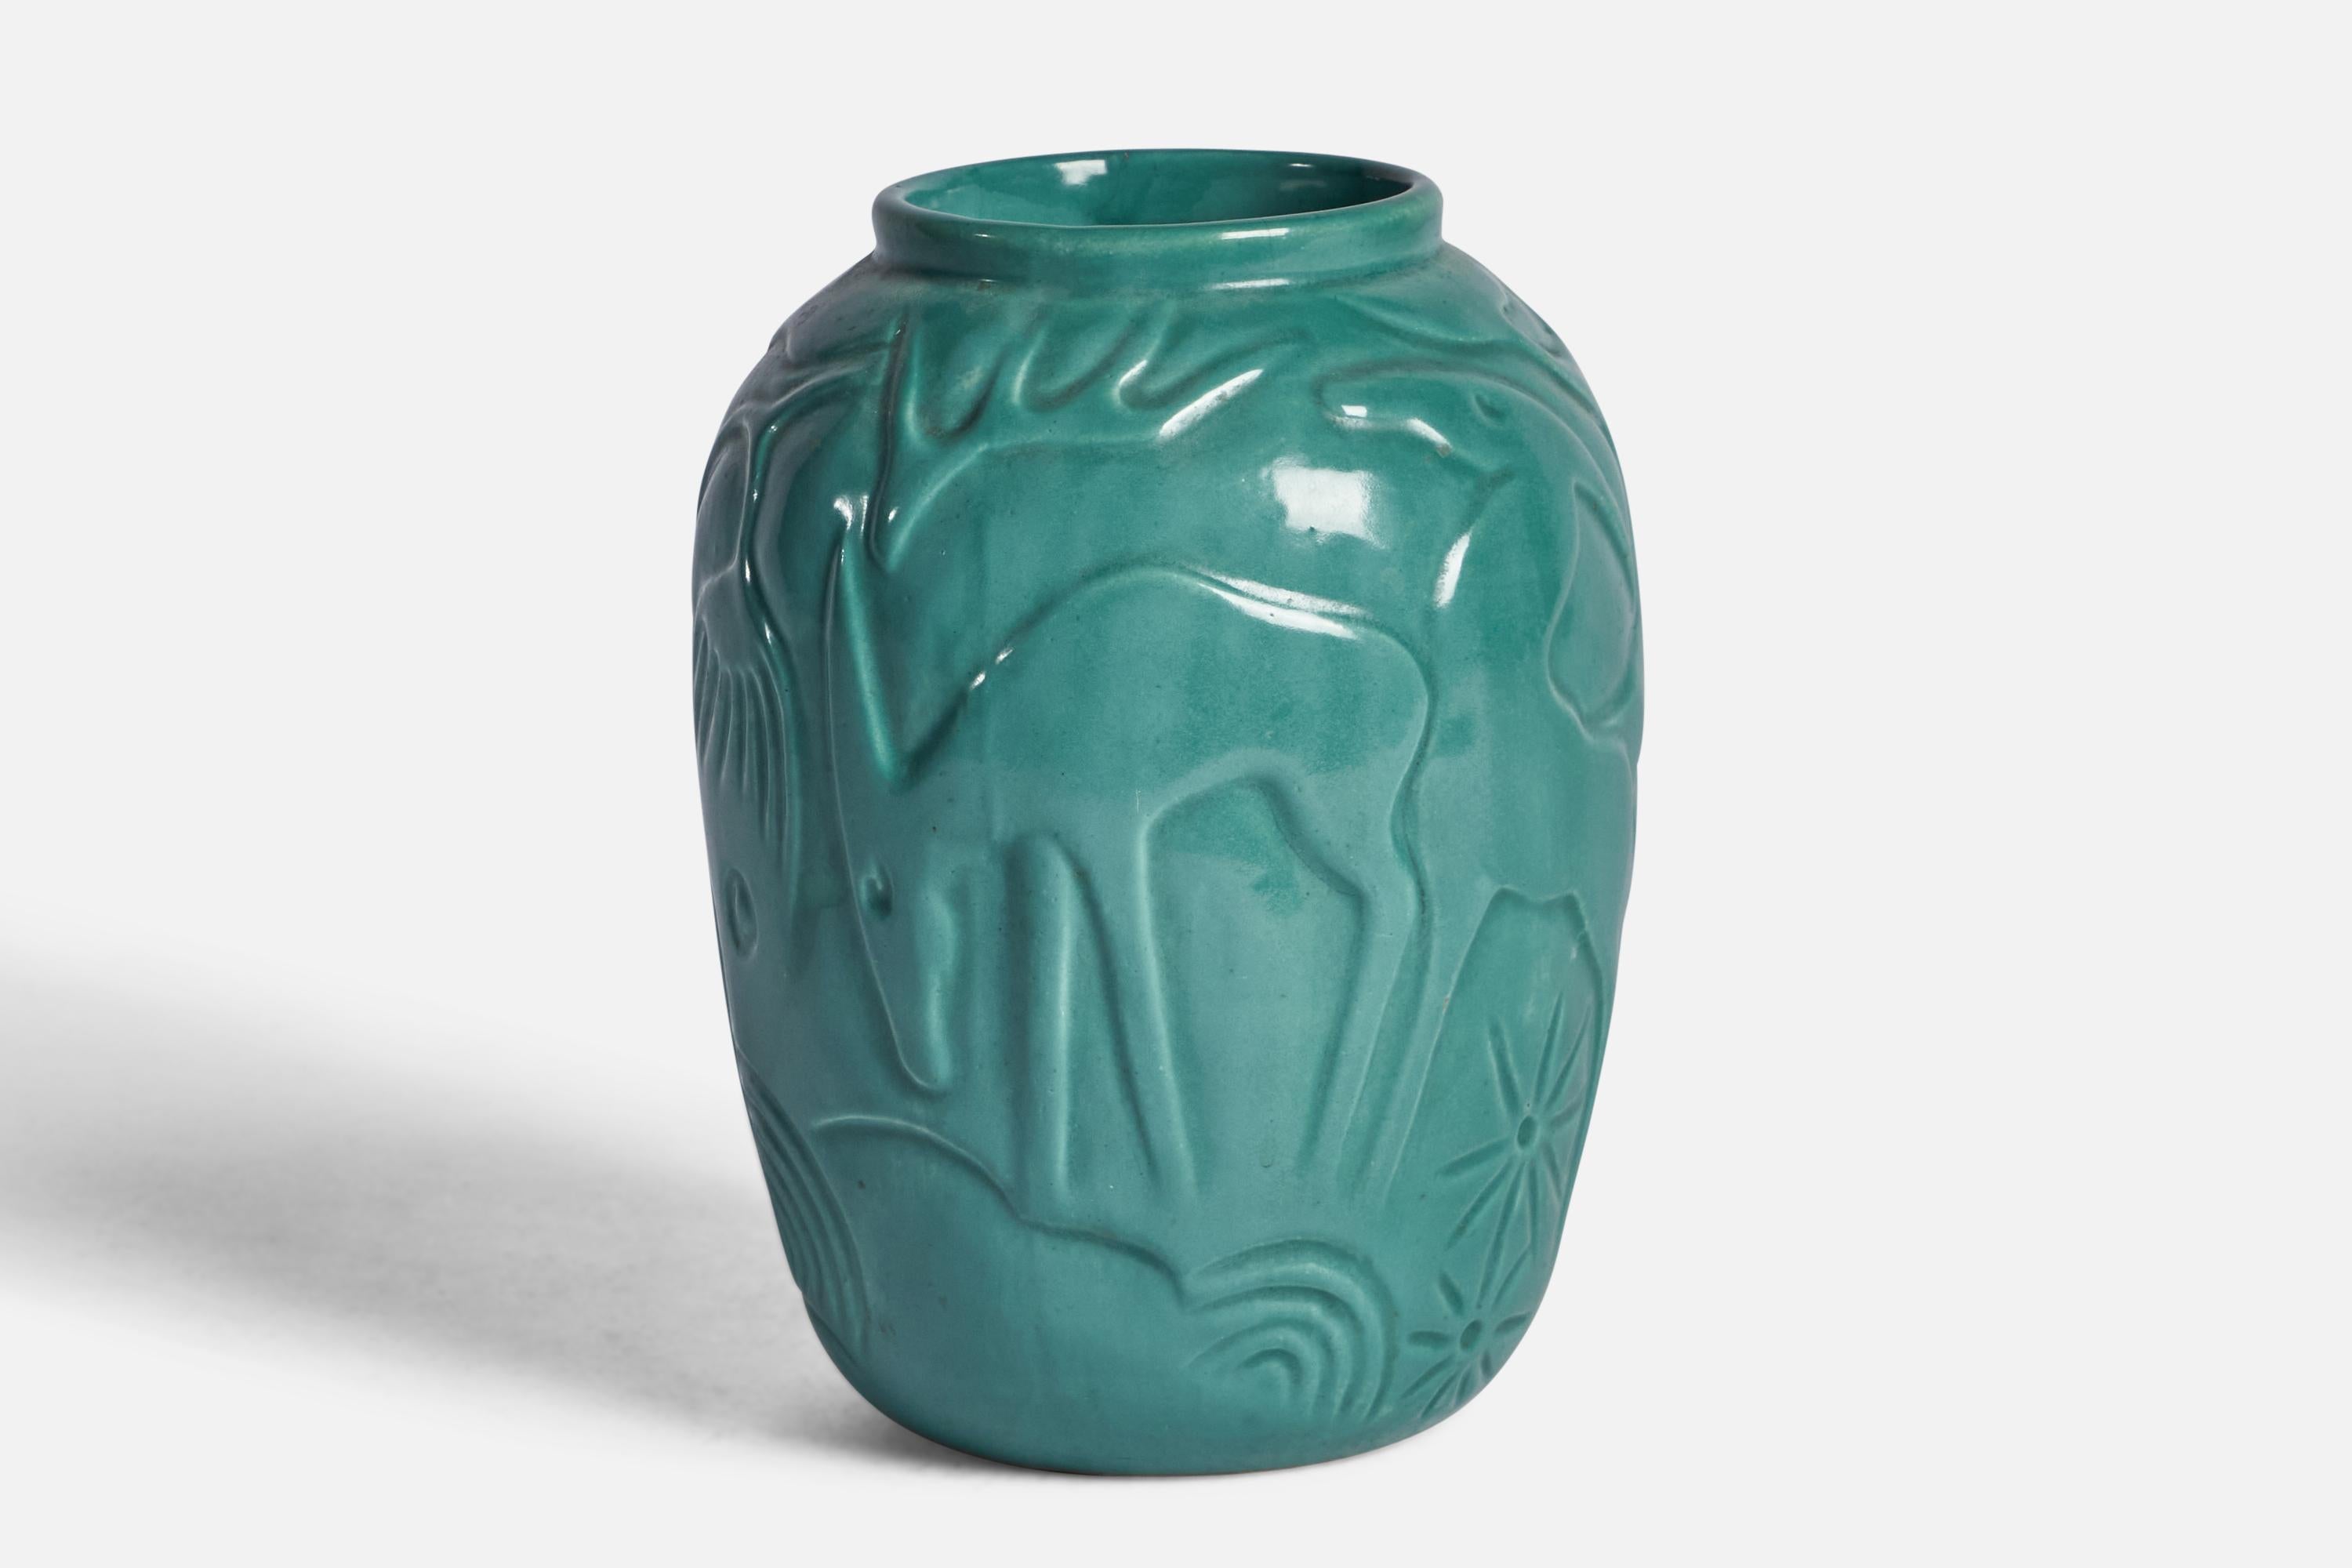 A green-glazed ceramic vase designed and produced by Syco Keramik, Sweden, c. 1930s.